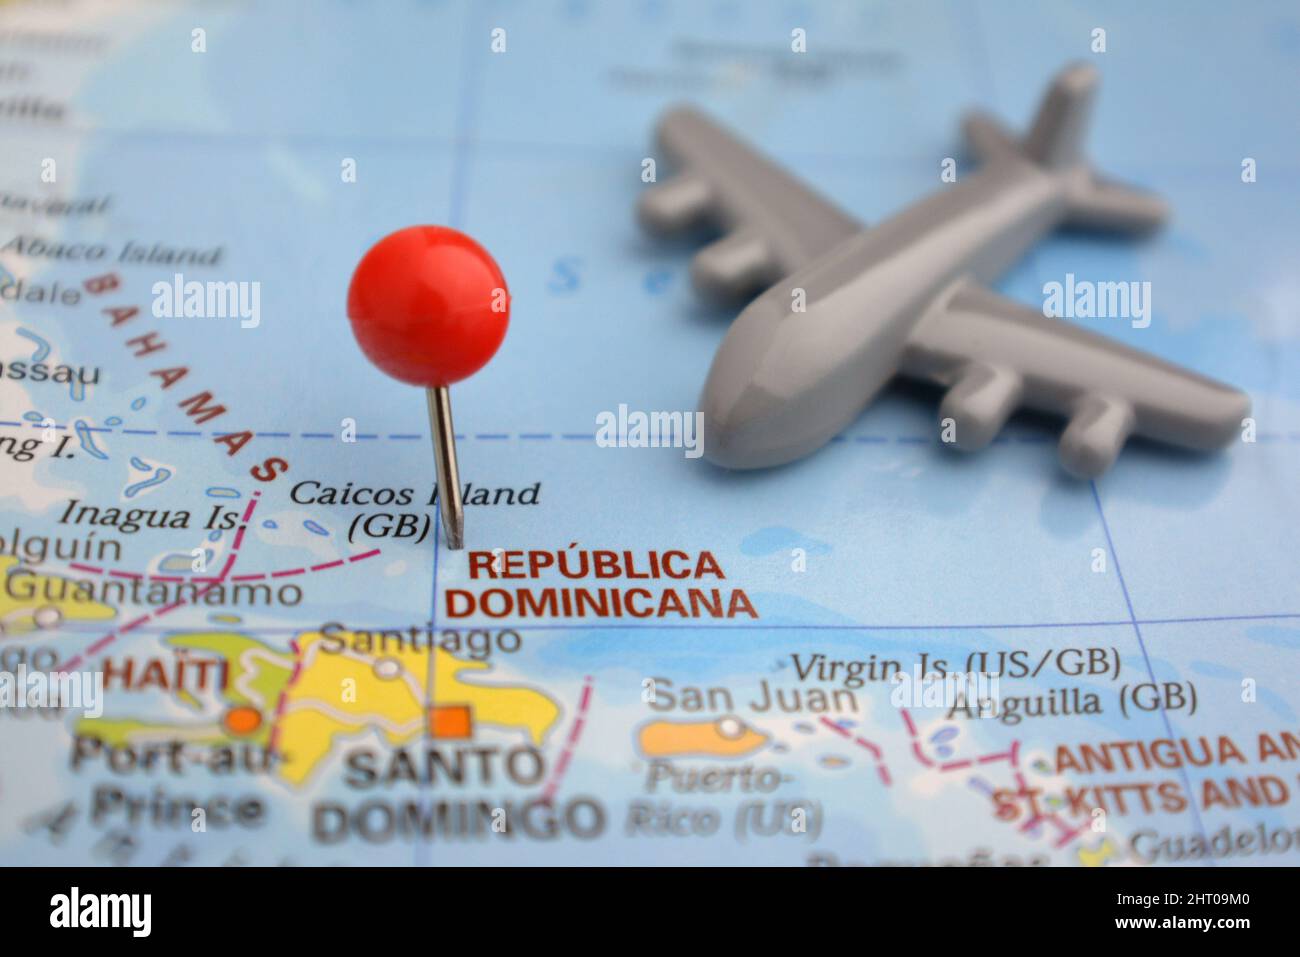 Republica Dominicana marked on map with red pin and plane Stock Photo